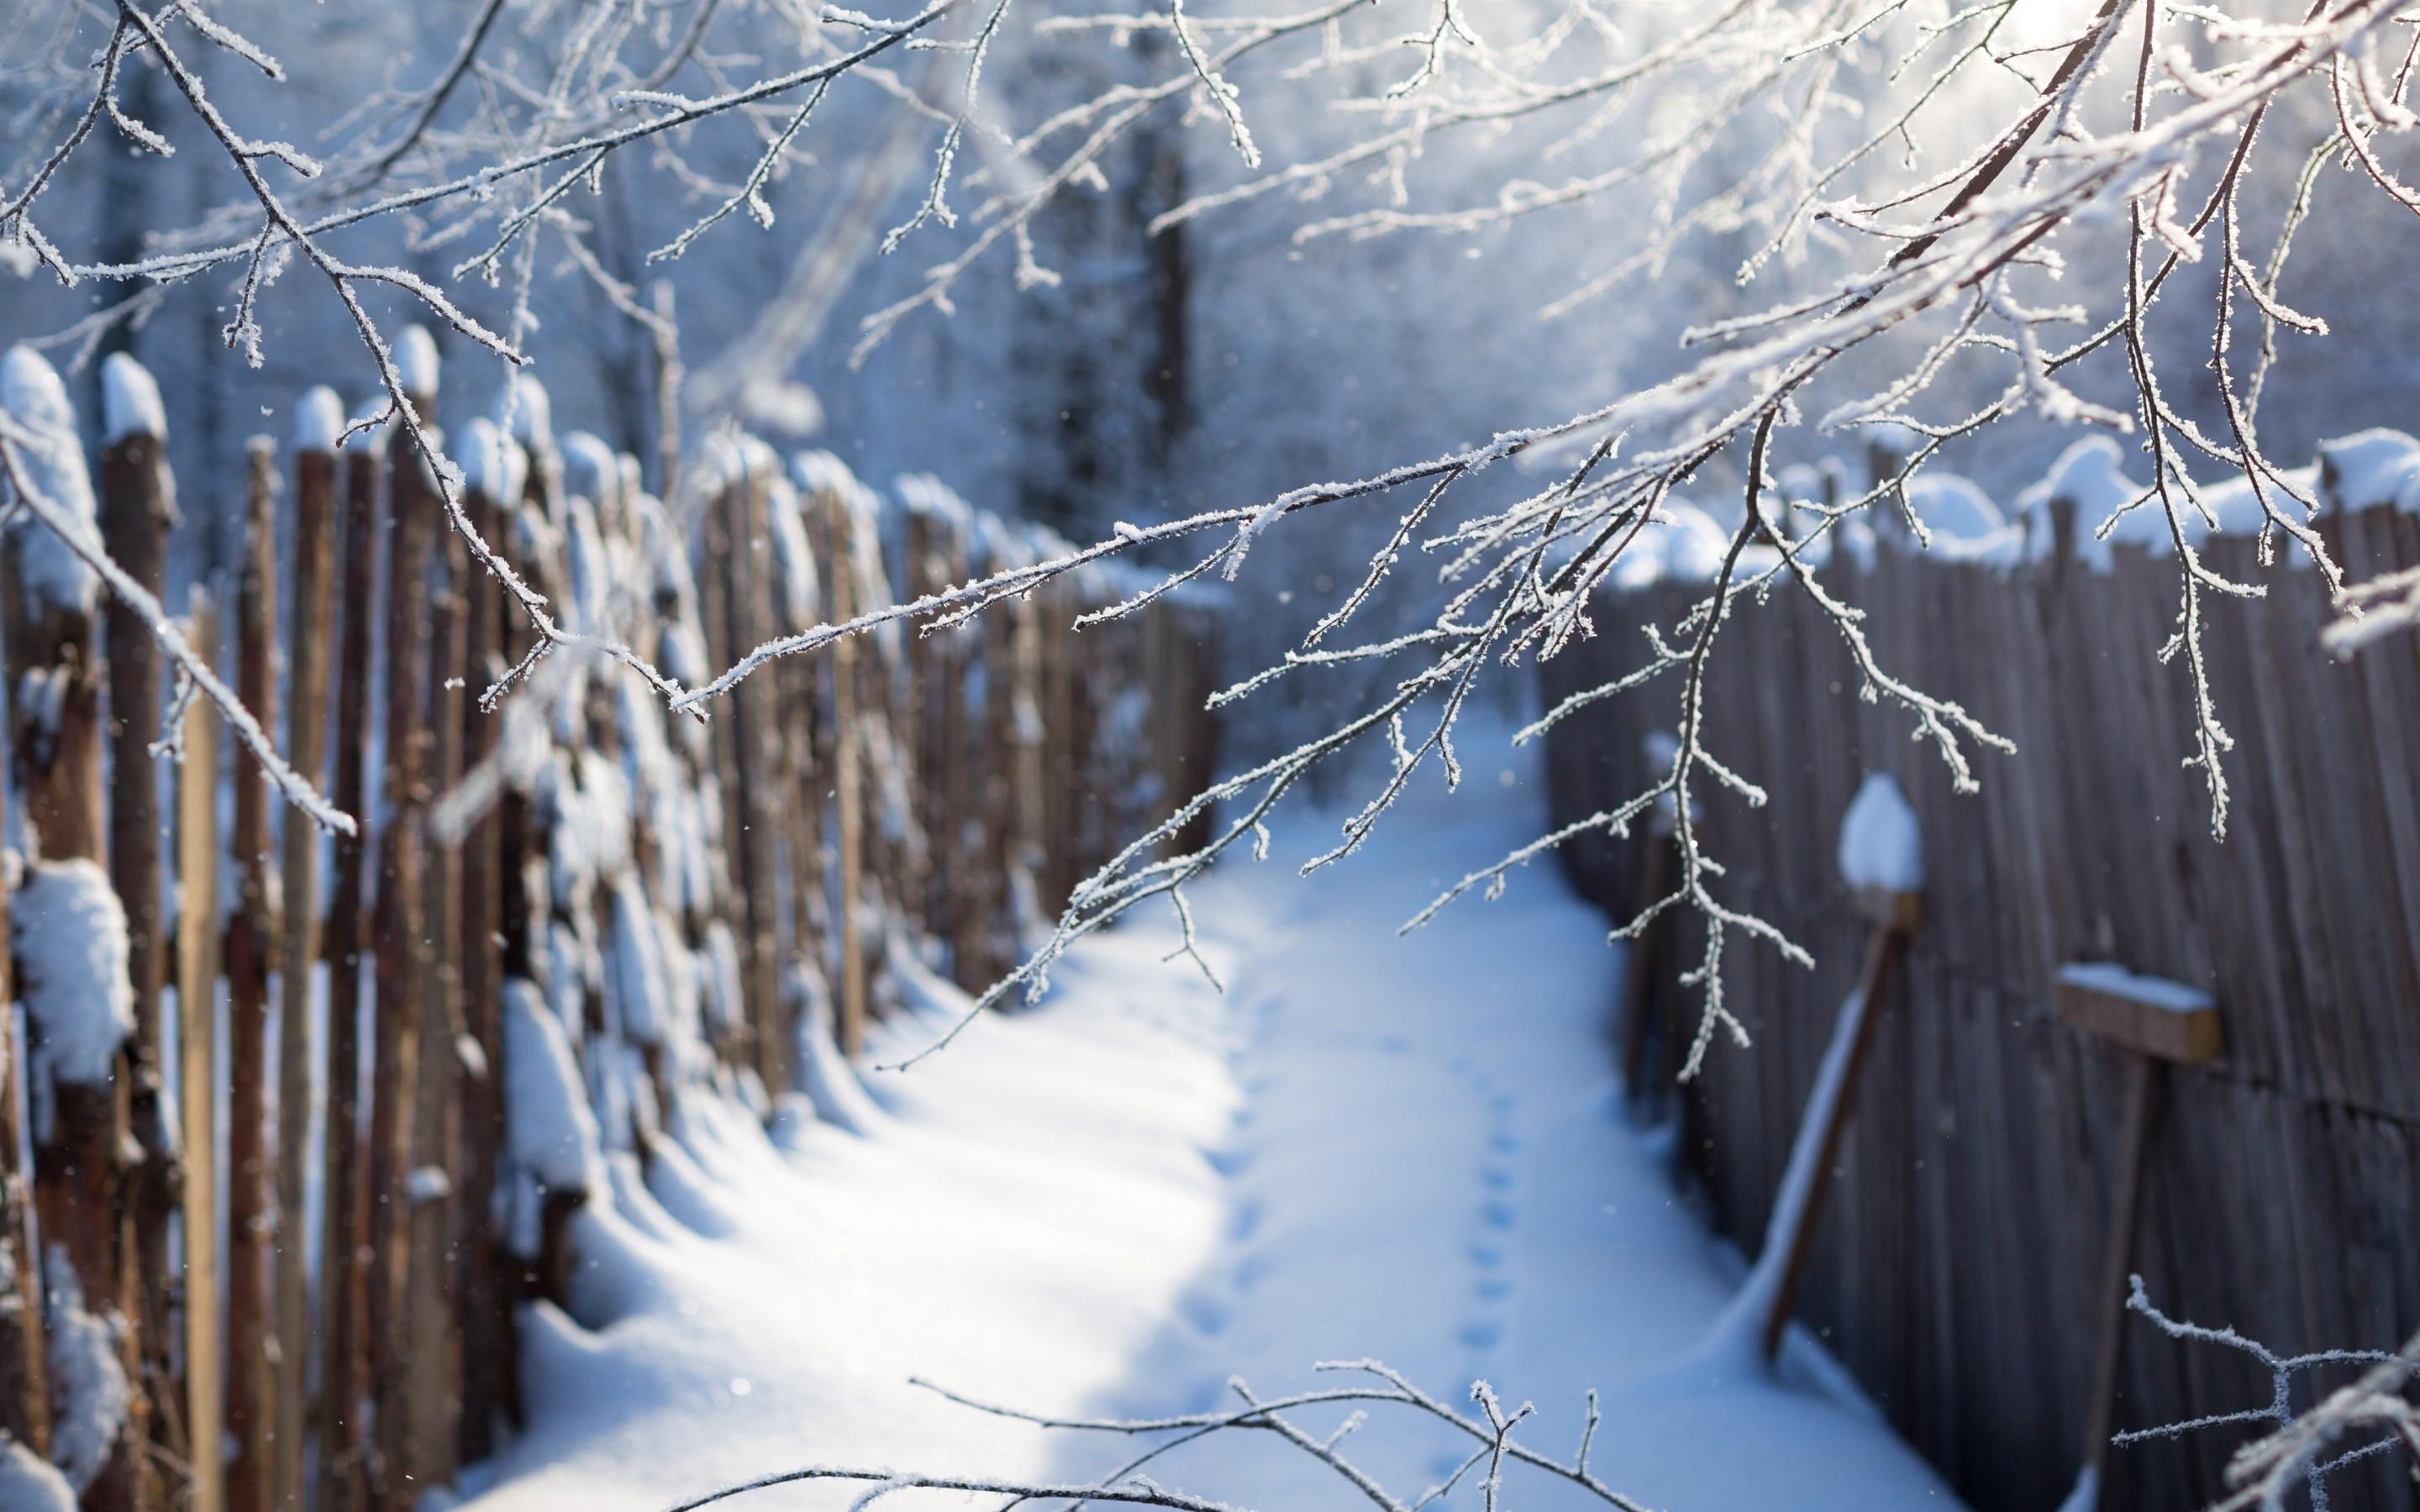 Download 2880x1800 Snow, Winter, Fence, Branches, Twigs